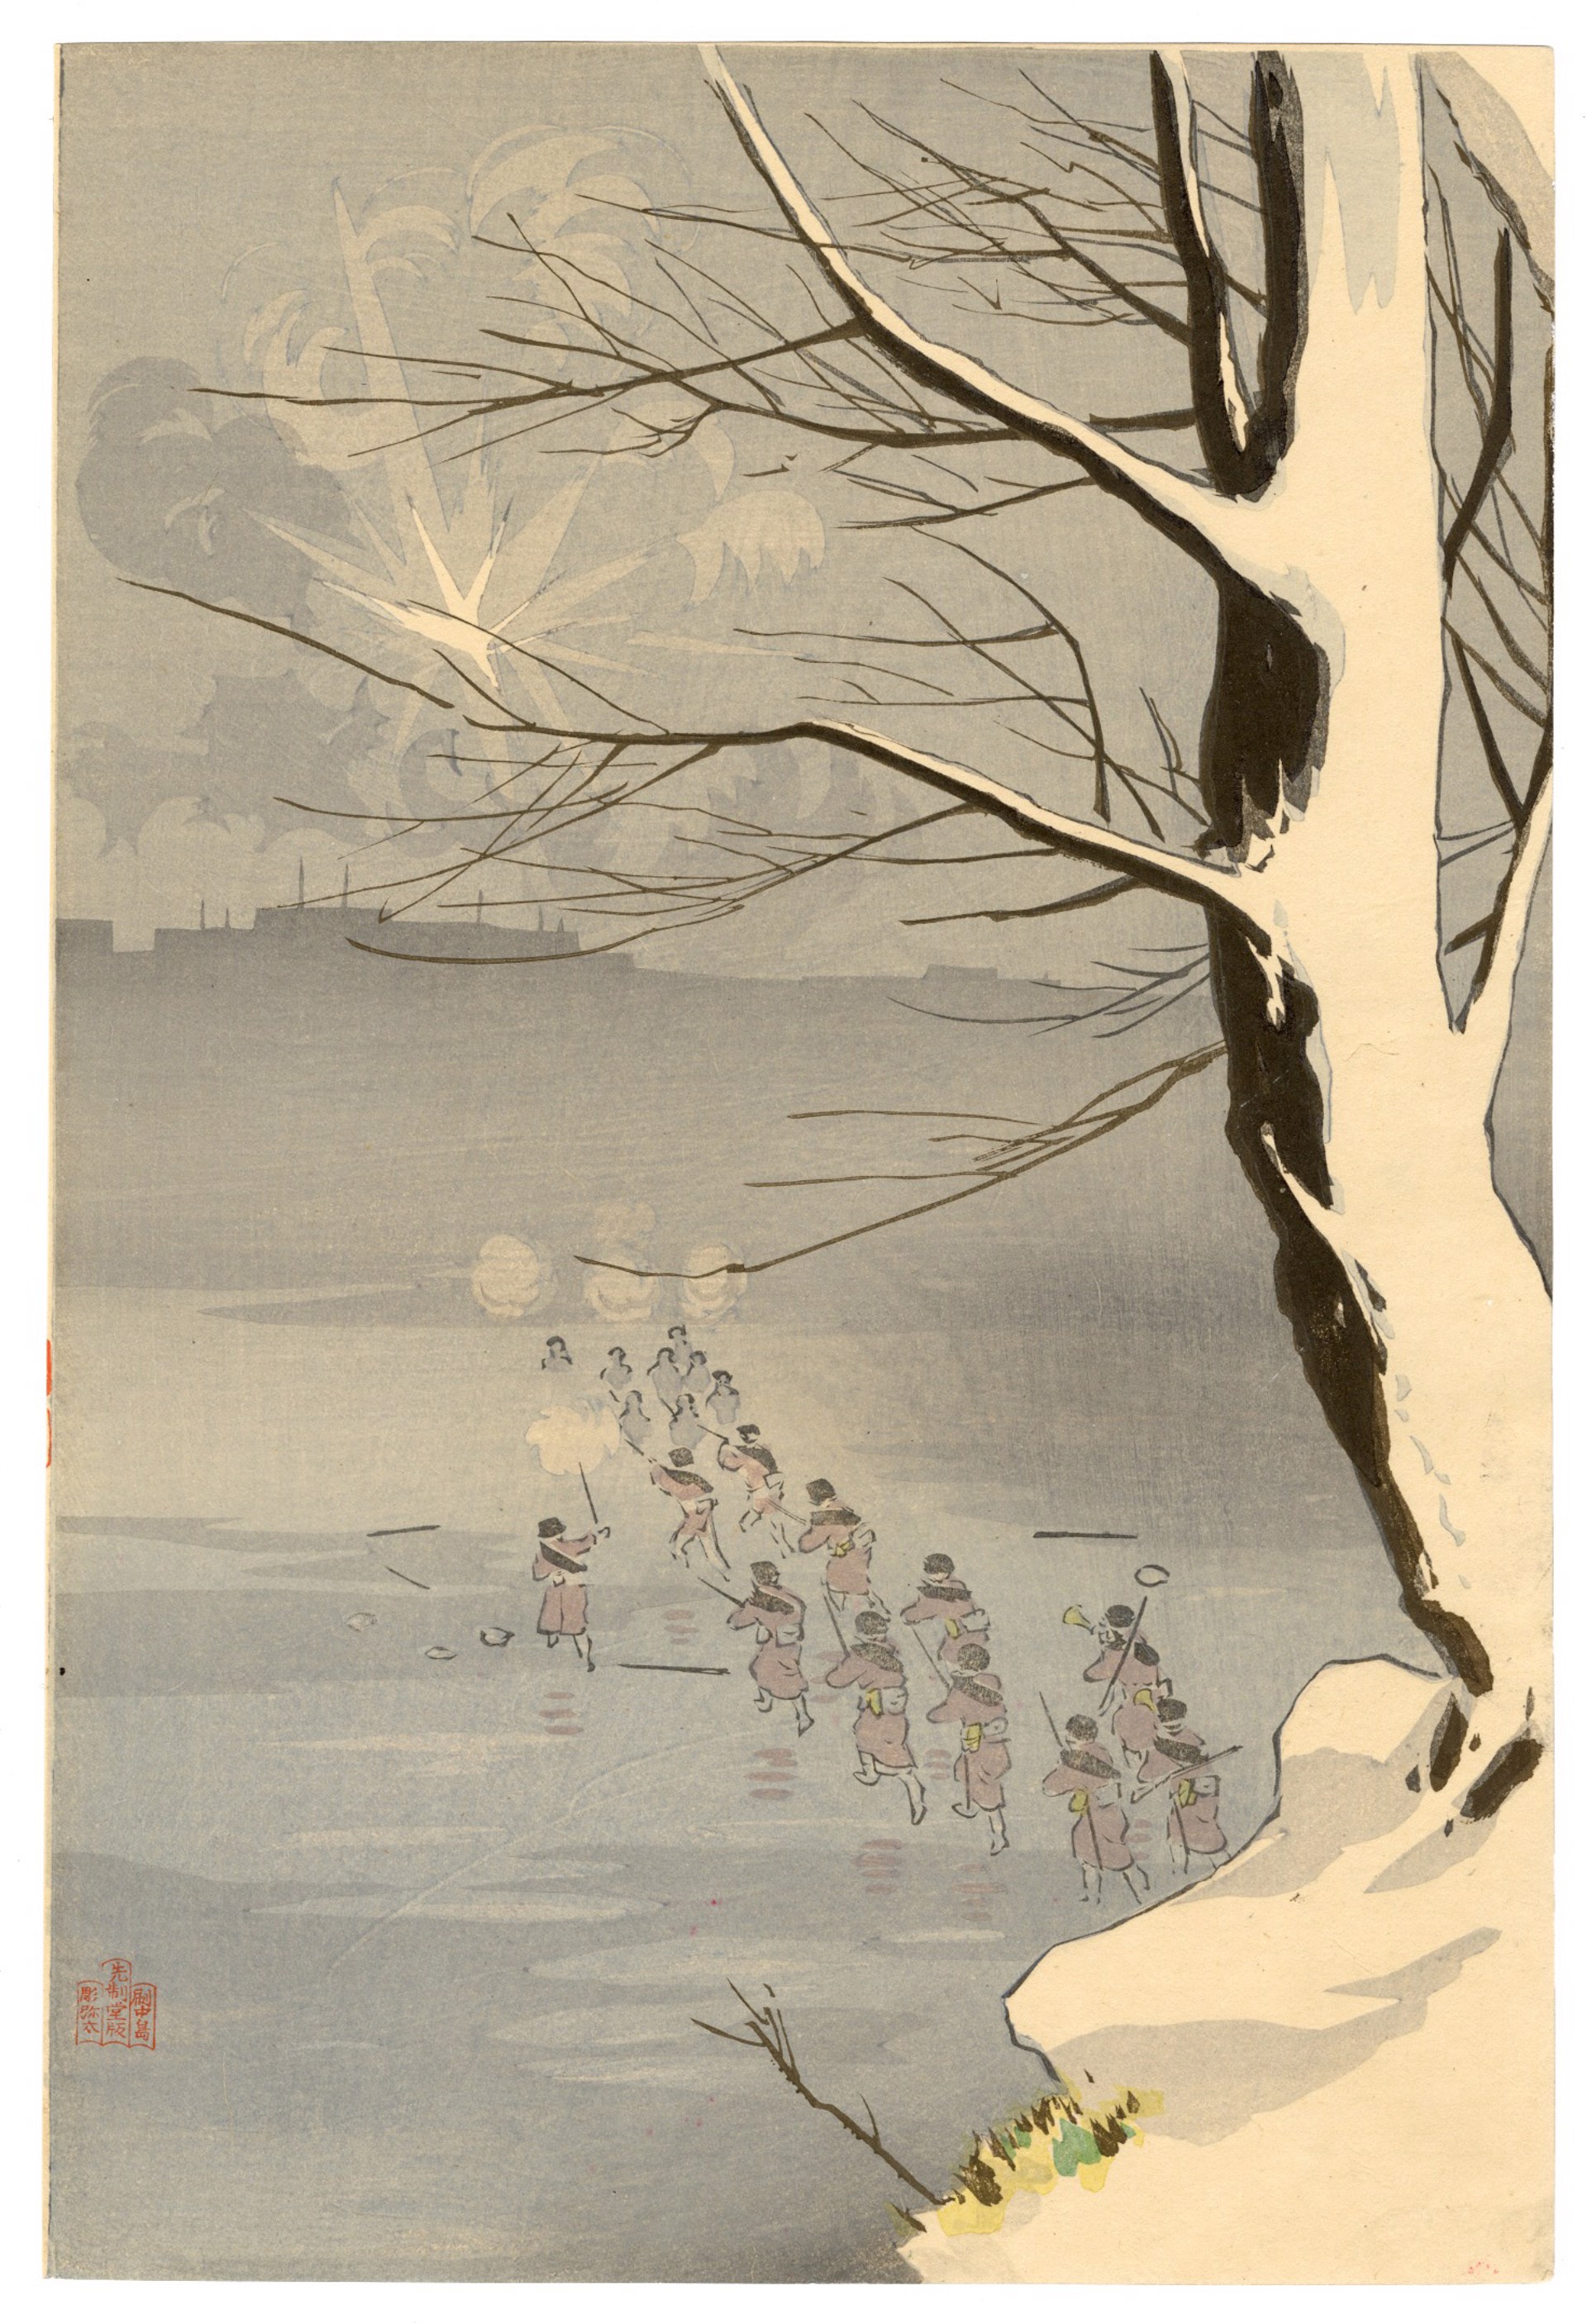 Invasion of China, in which our Troops Fought Fiercely in Ice and Snow at Haicheng and Major General Oshima Bravely Faced the Enemy Sino - Japanese war by Beisaku